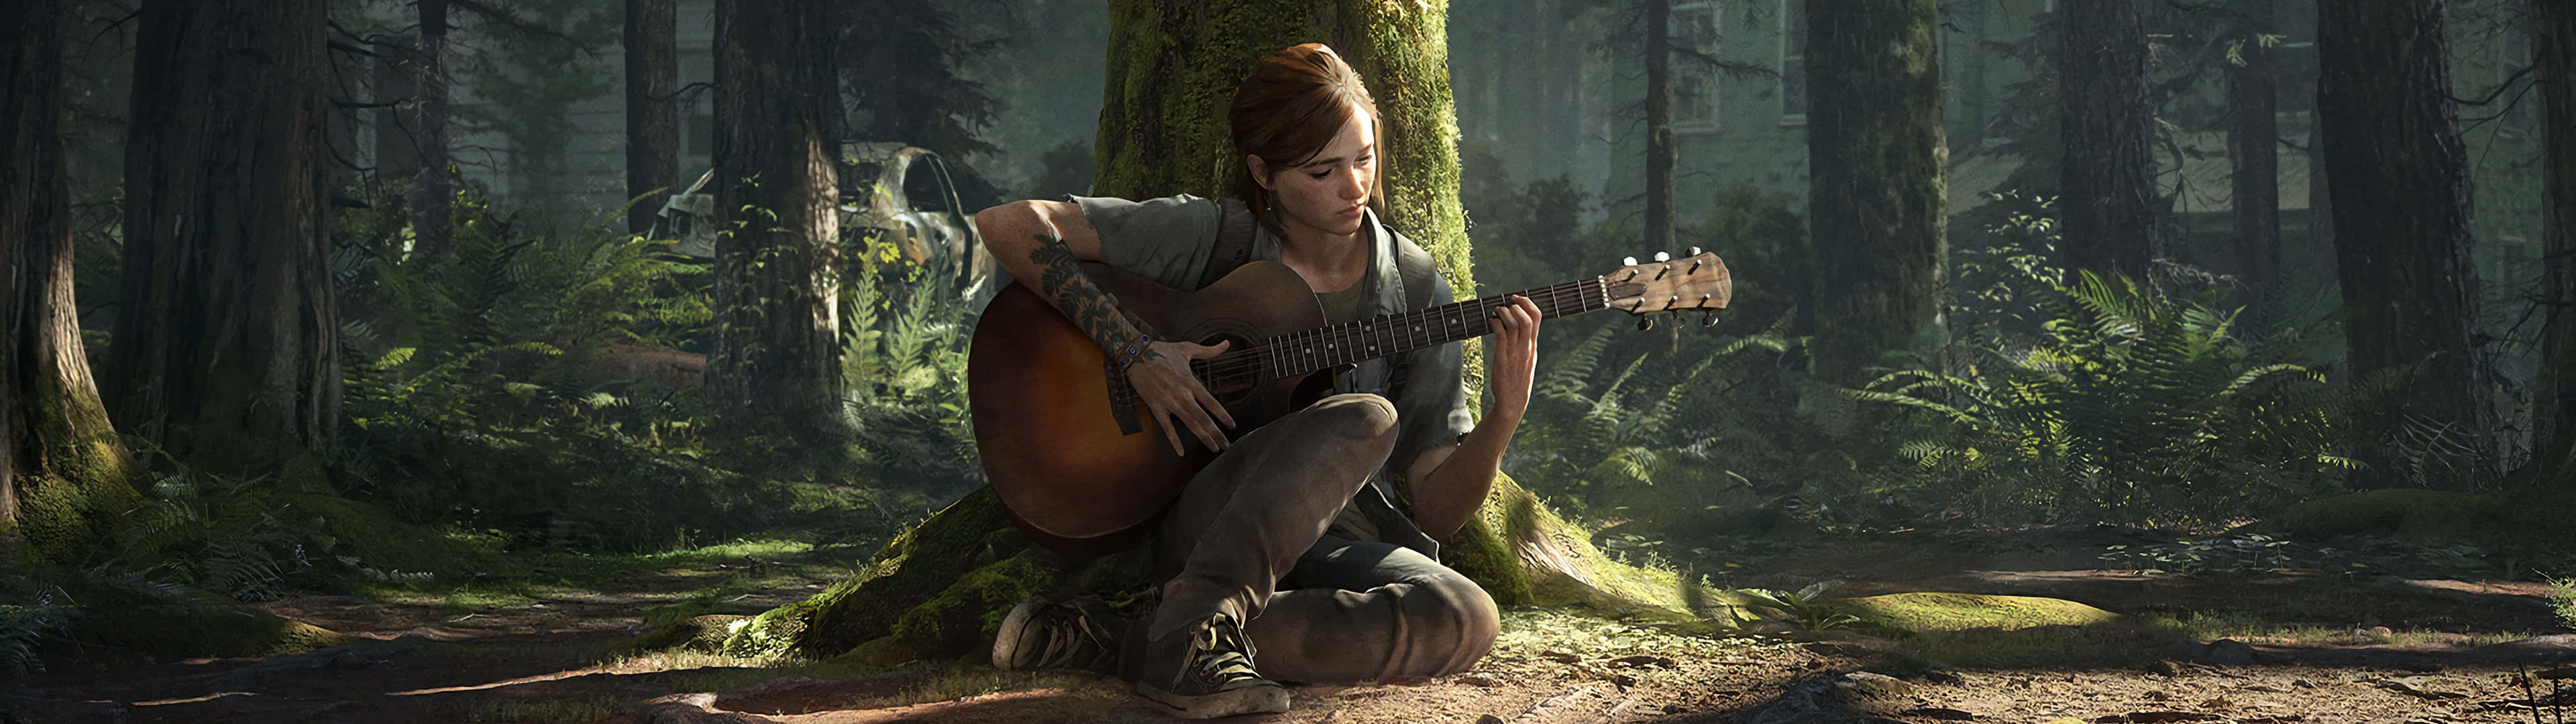 3840 X 1080 Gaming The Last Of Us Wallpaper